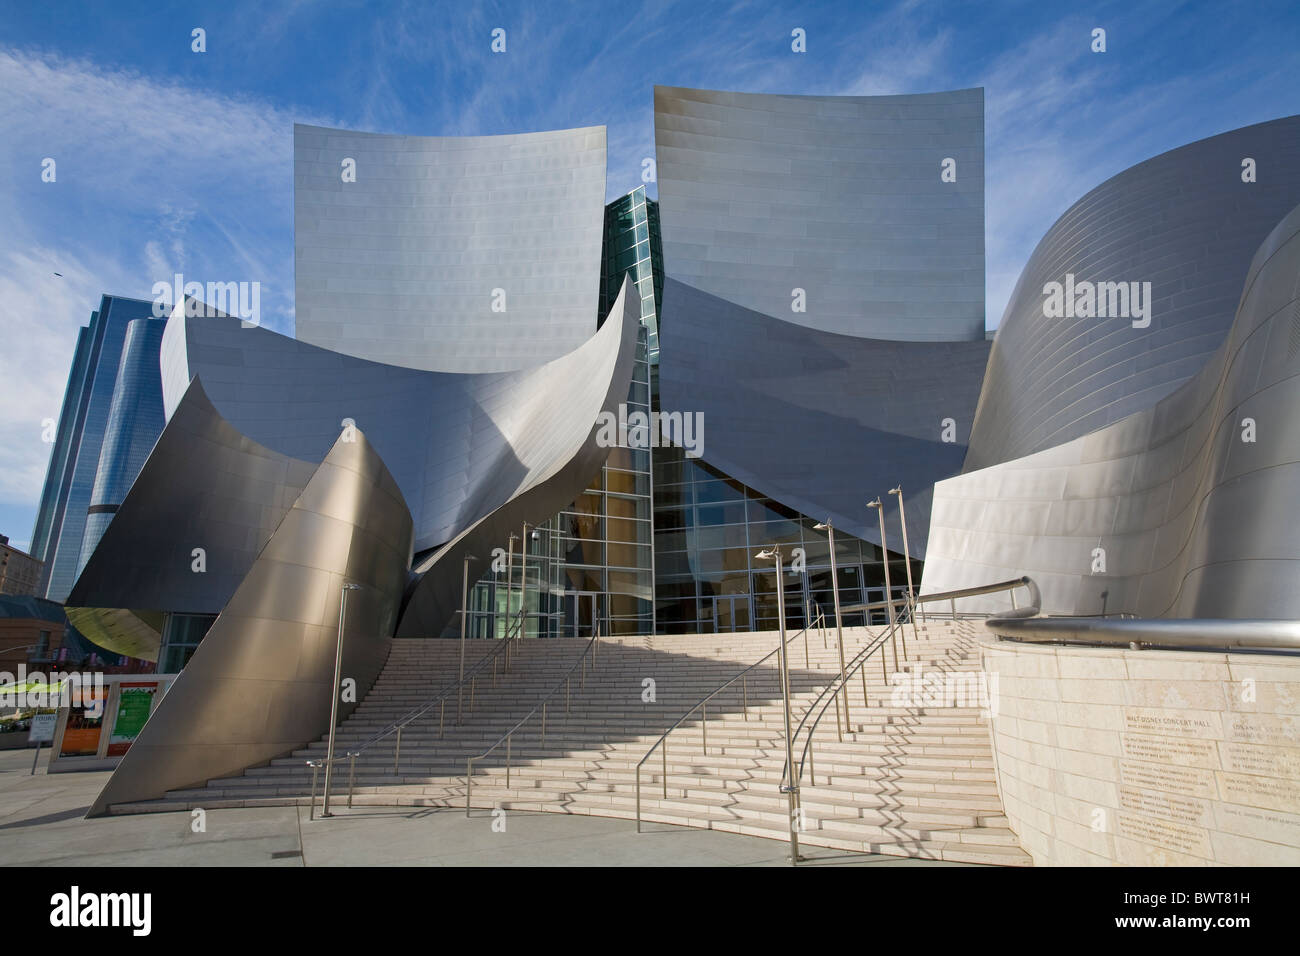 Walt Disney Concert Hall by Frank Gehry, Los Angeles Music Center, Grand Avenue, Downtown Los Angeles, California, USA Stock Photo